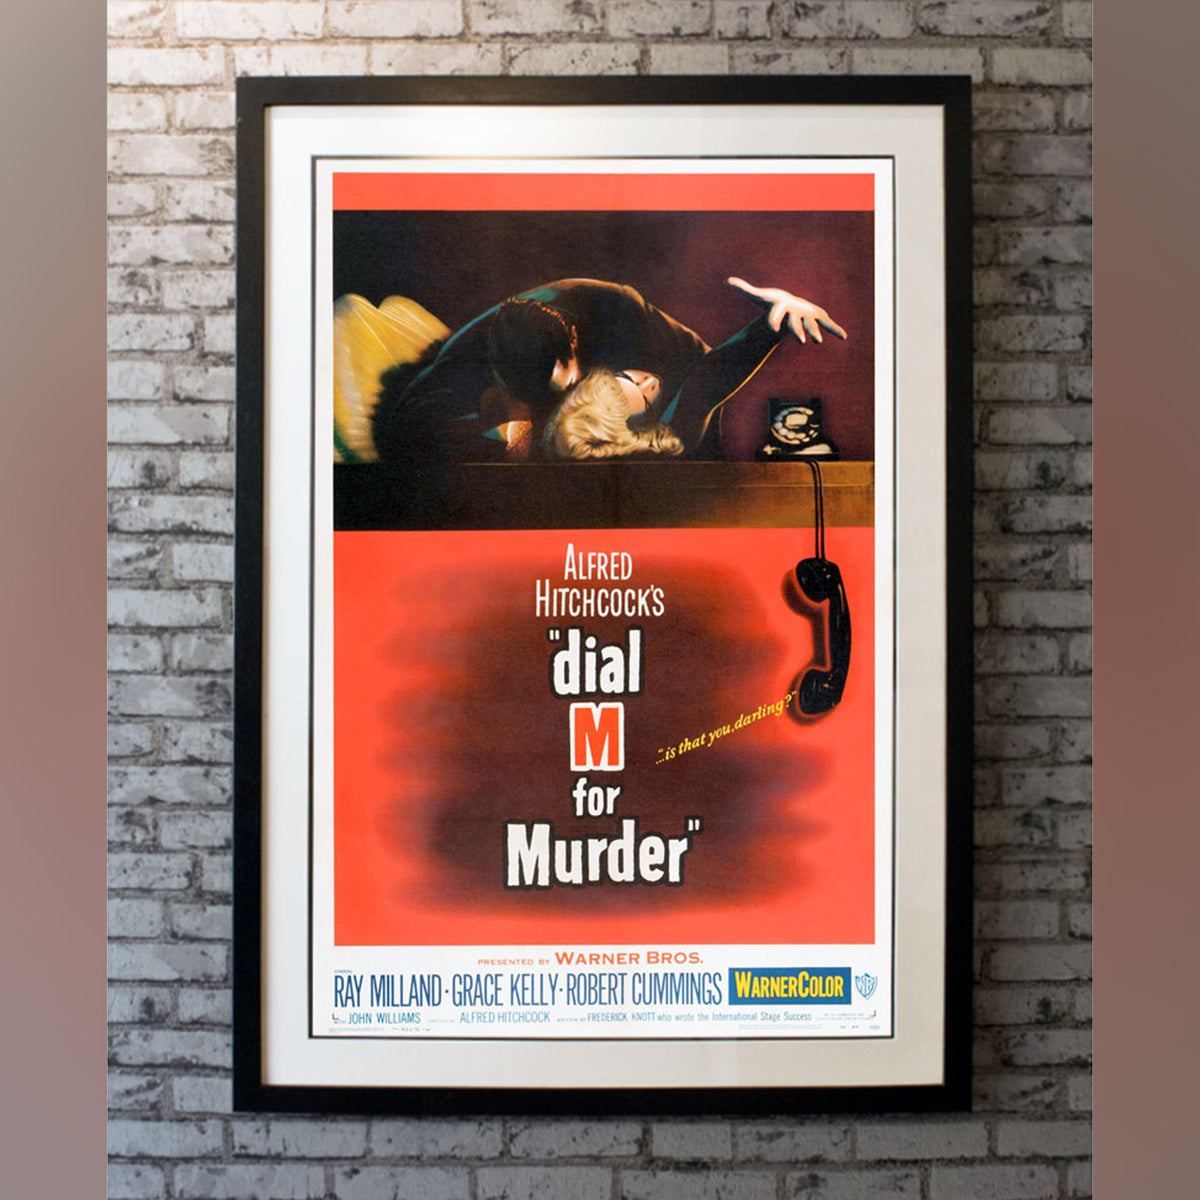 Original Movie Poster of Dial M For Murder (1954)